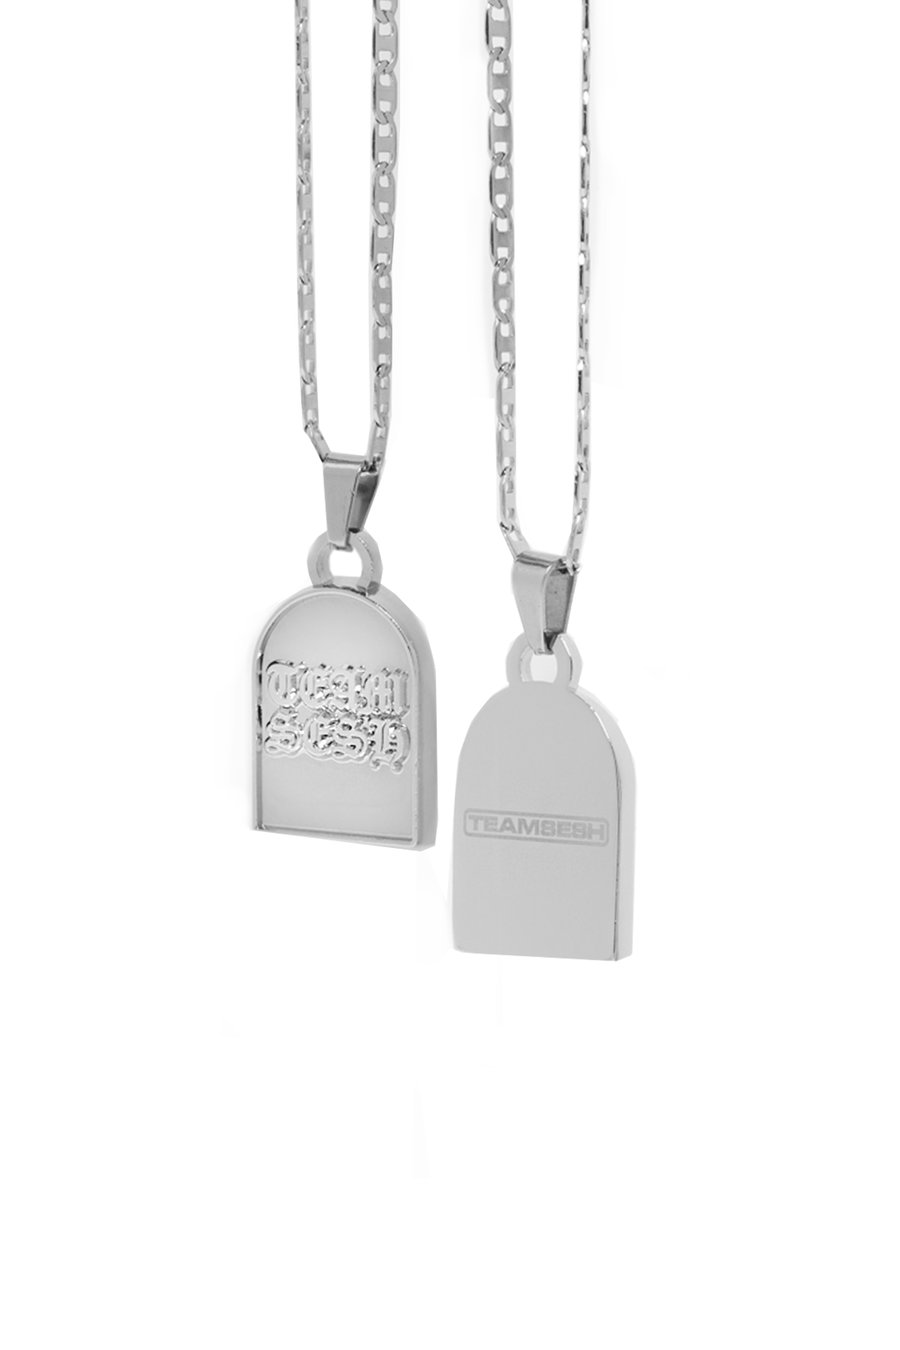 Image of "Tombstone" Necklace 